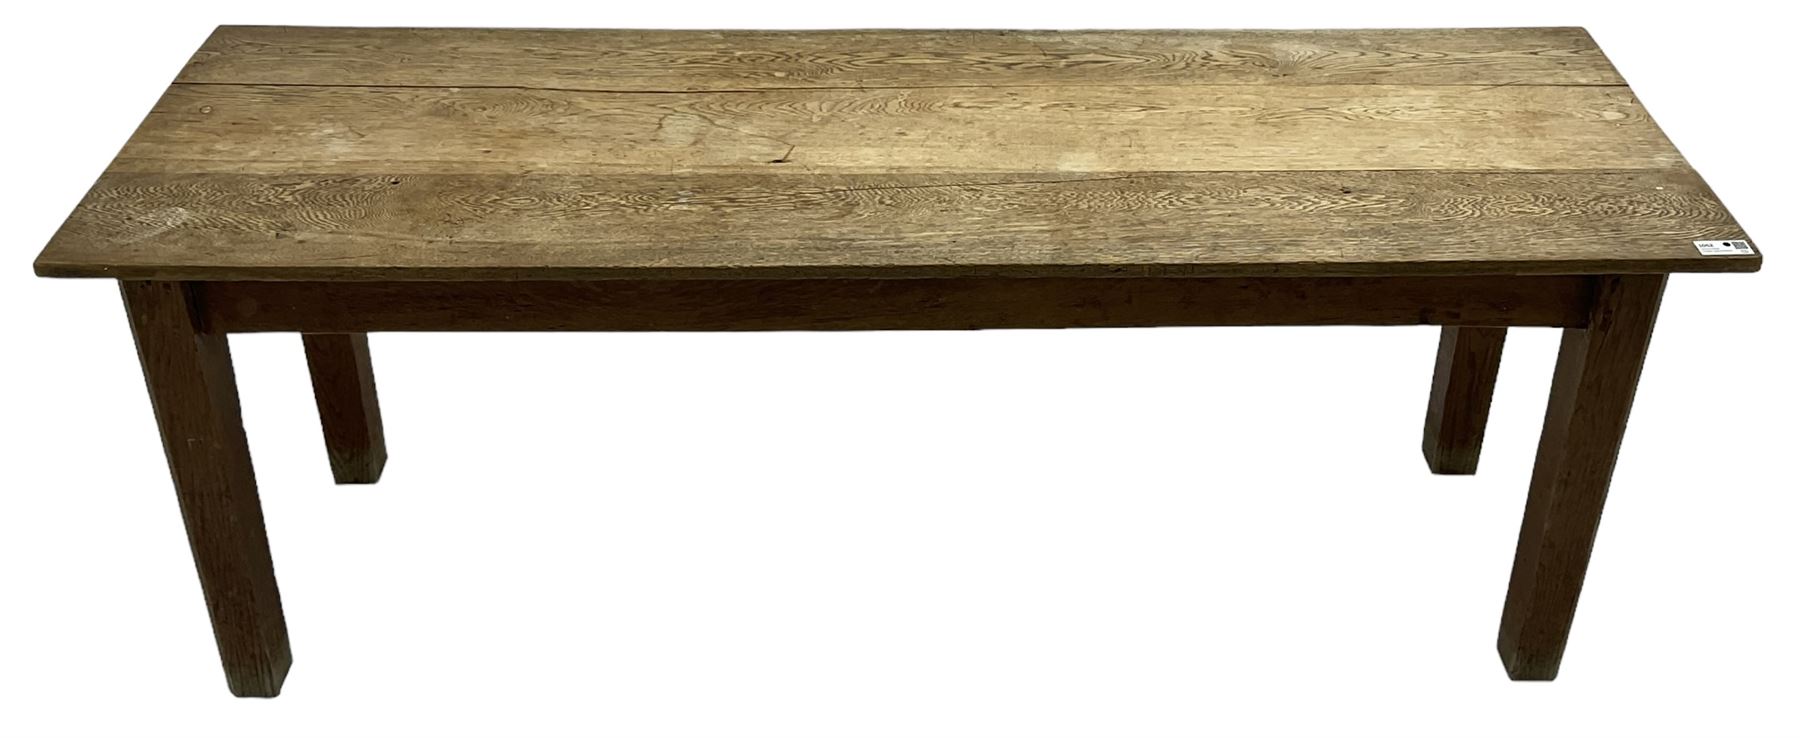 20th century oak refectory dining table - Image 3 of 7